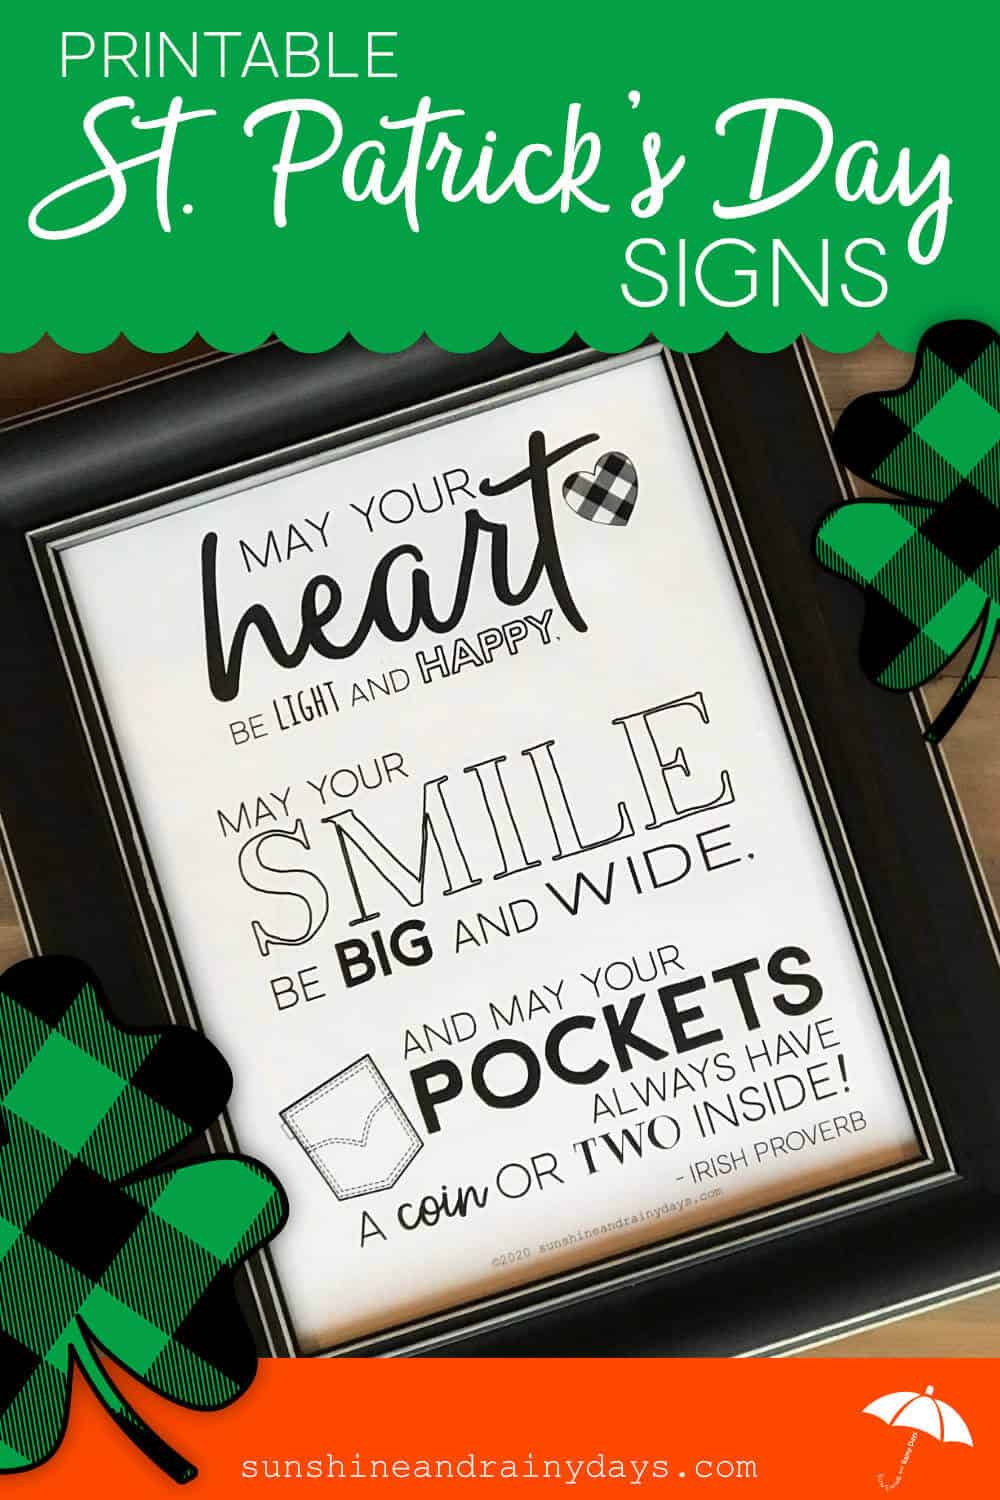 printable-st-patrick-s-day-signs-sunshine-and-rainy-days